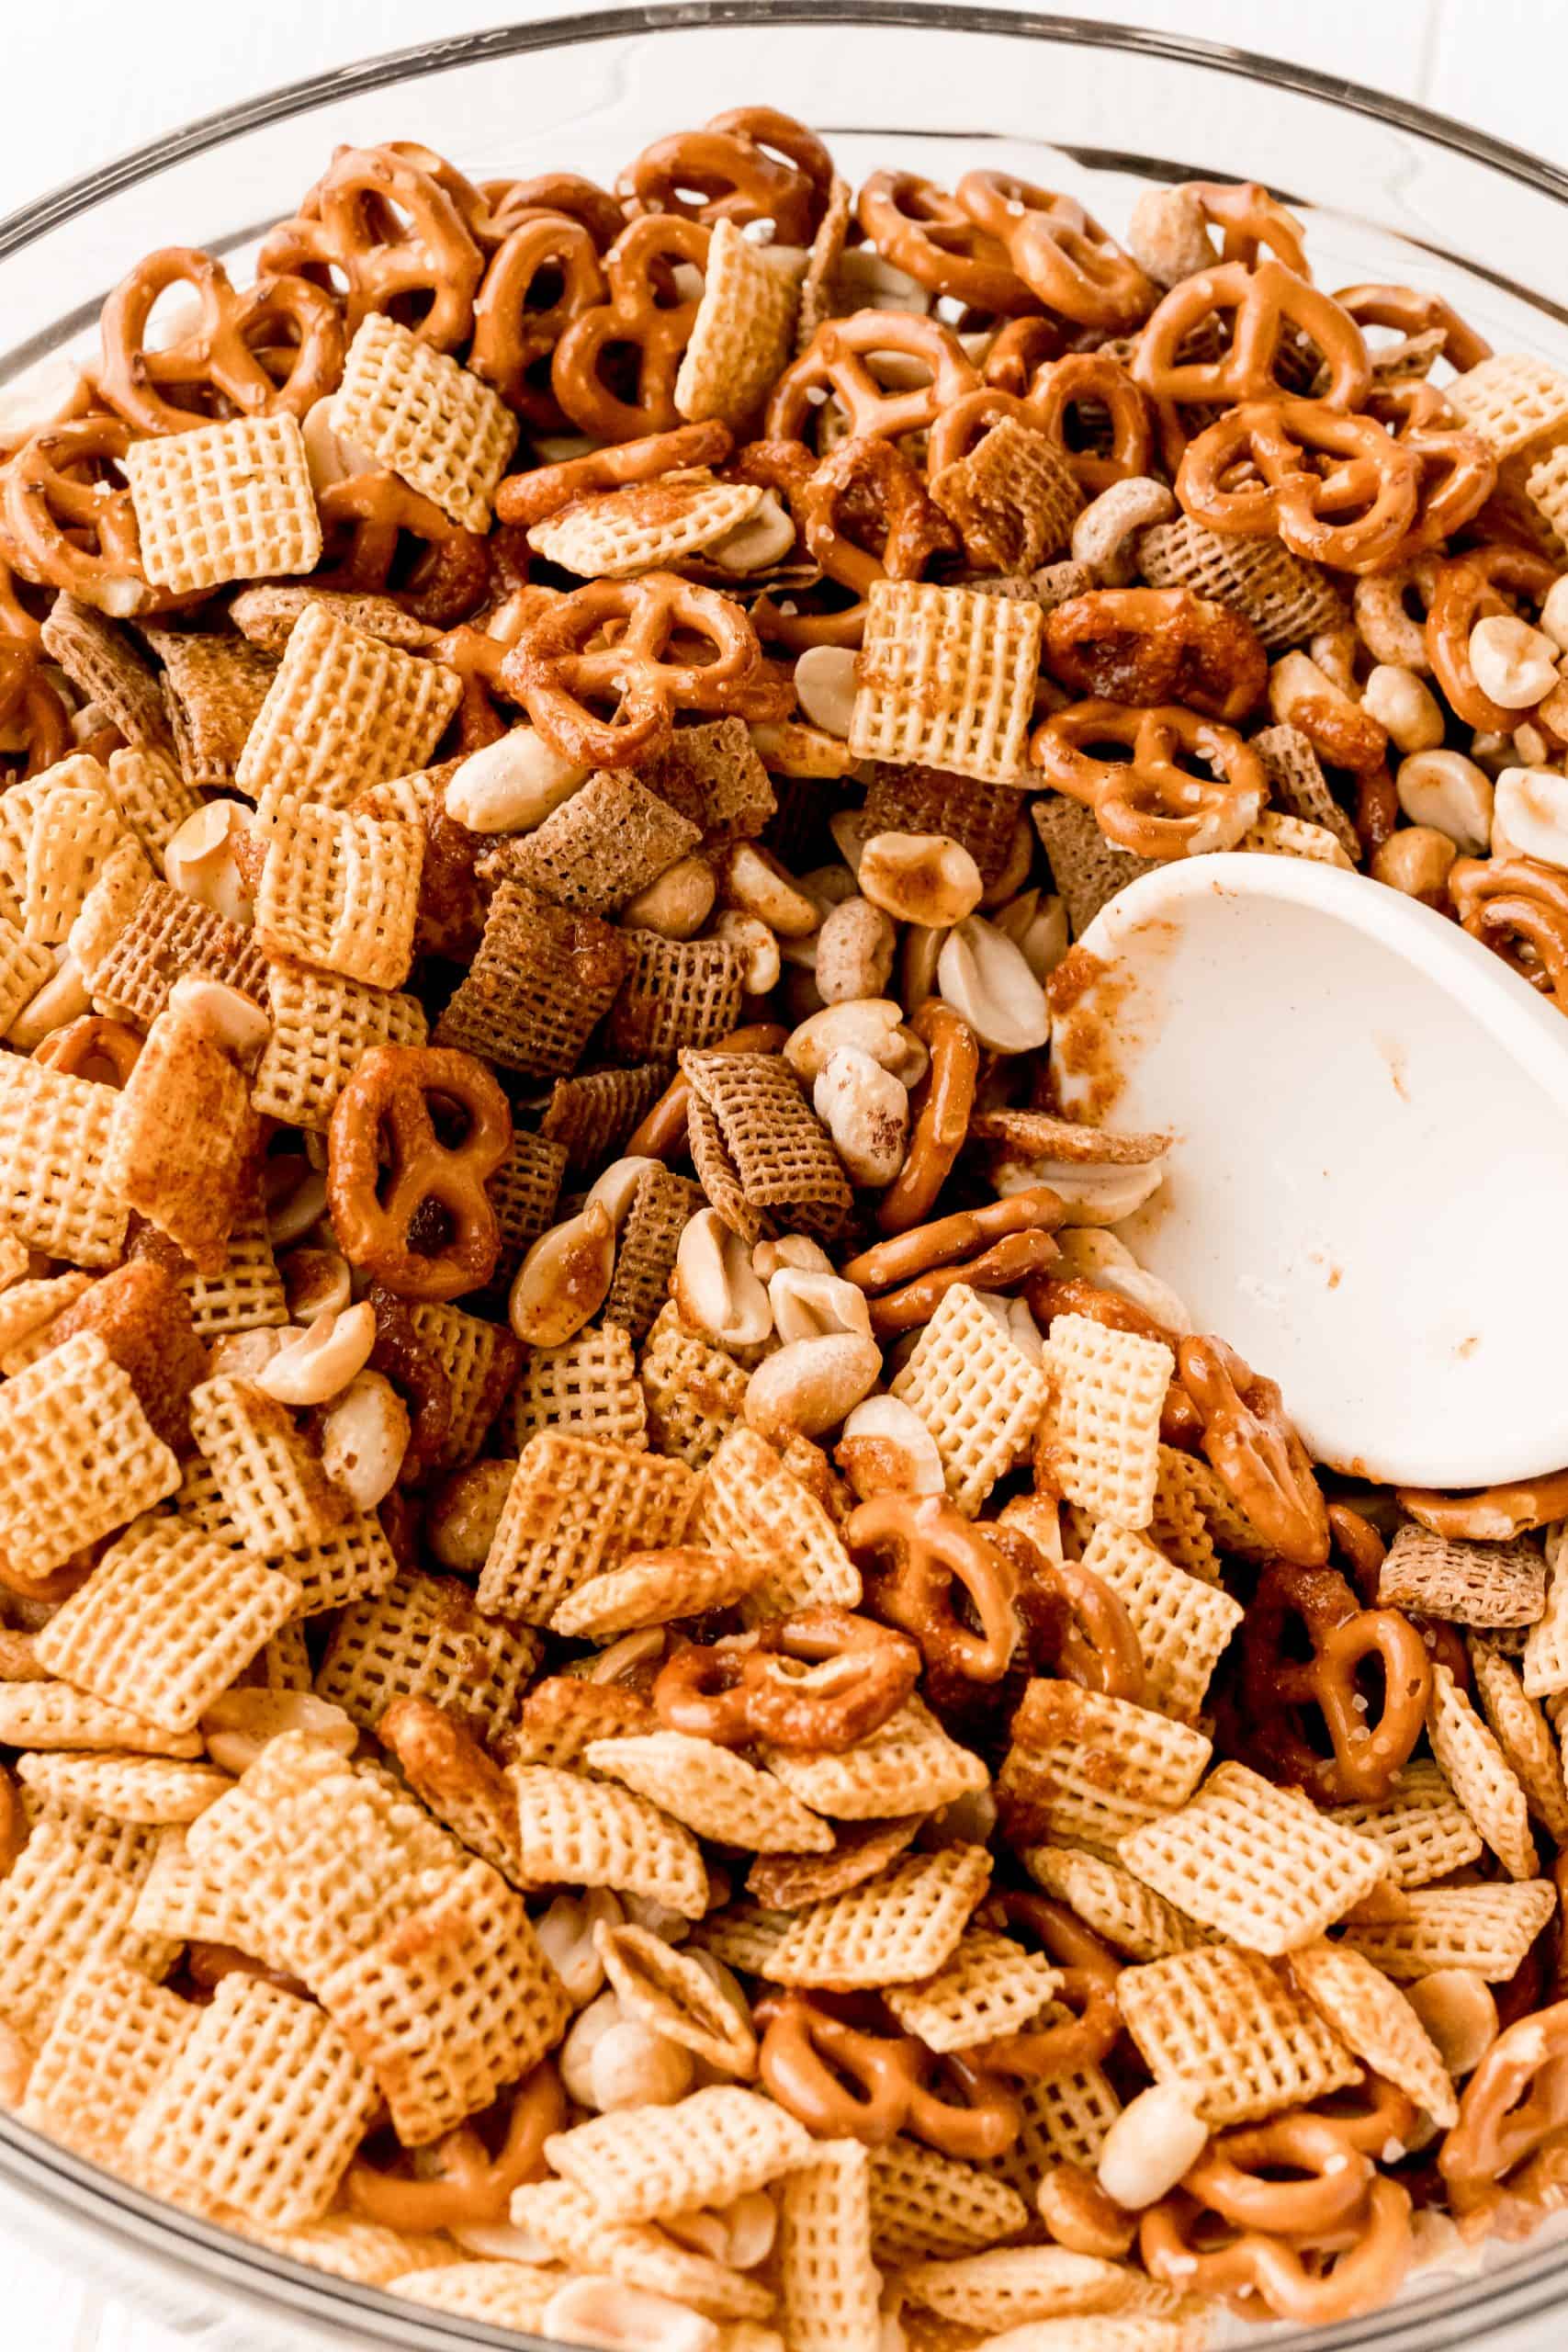 Butter and spices added to Chex mix being stirred